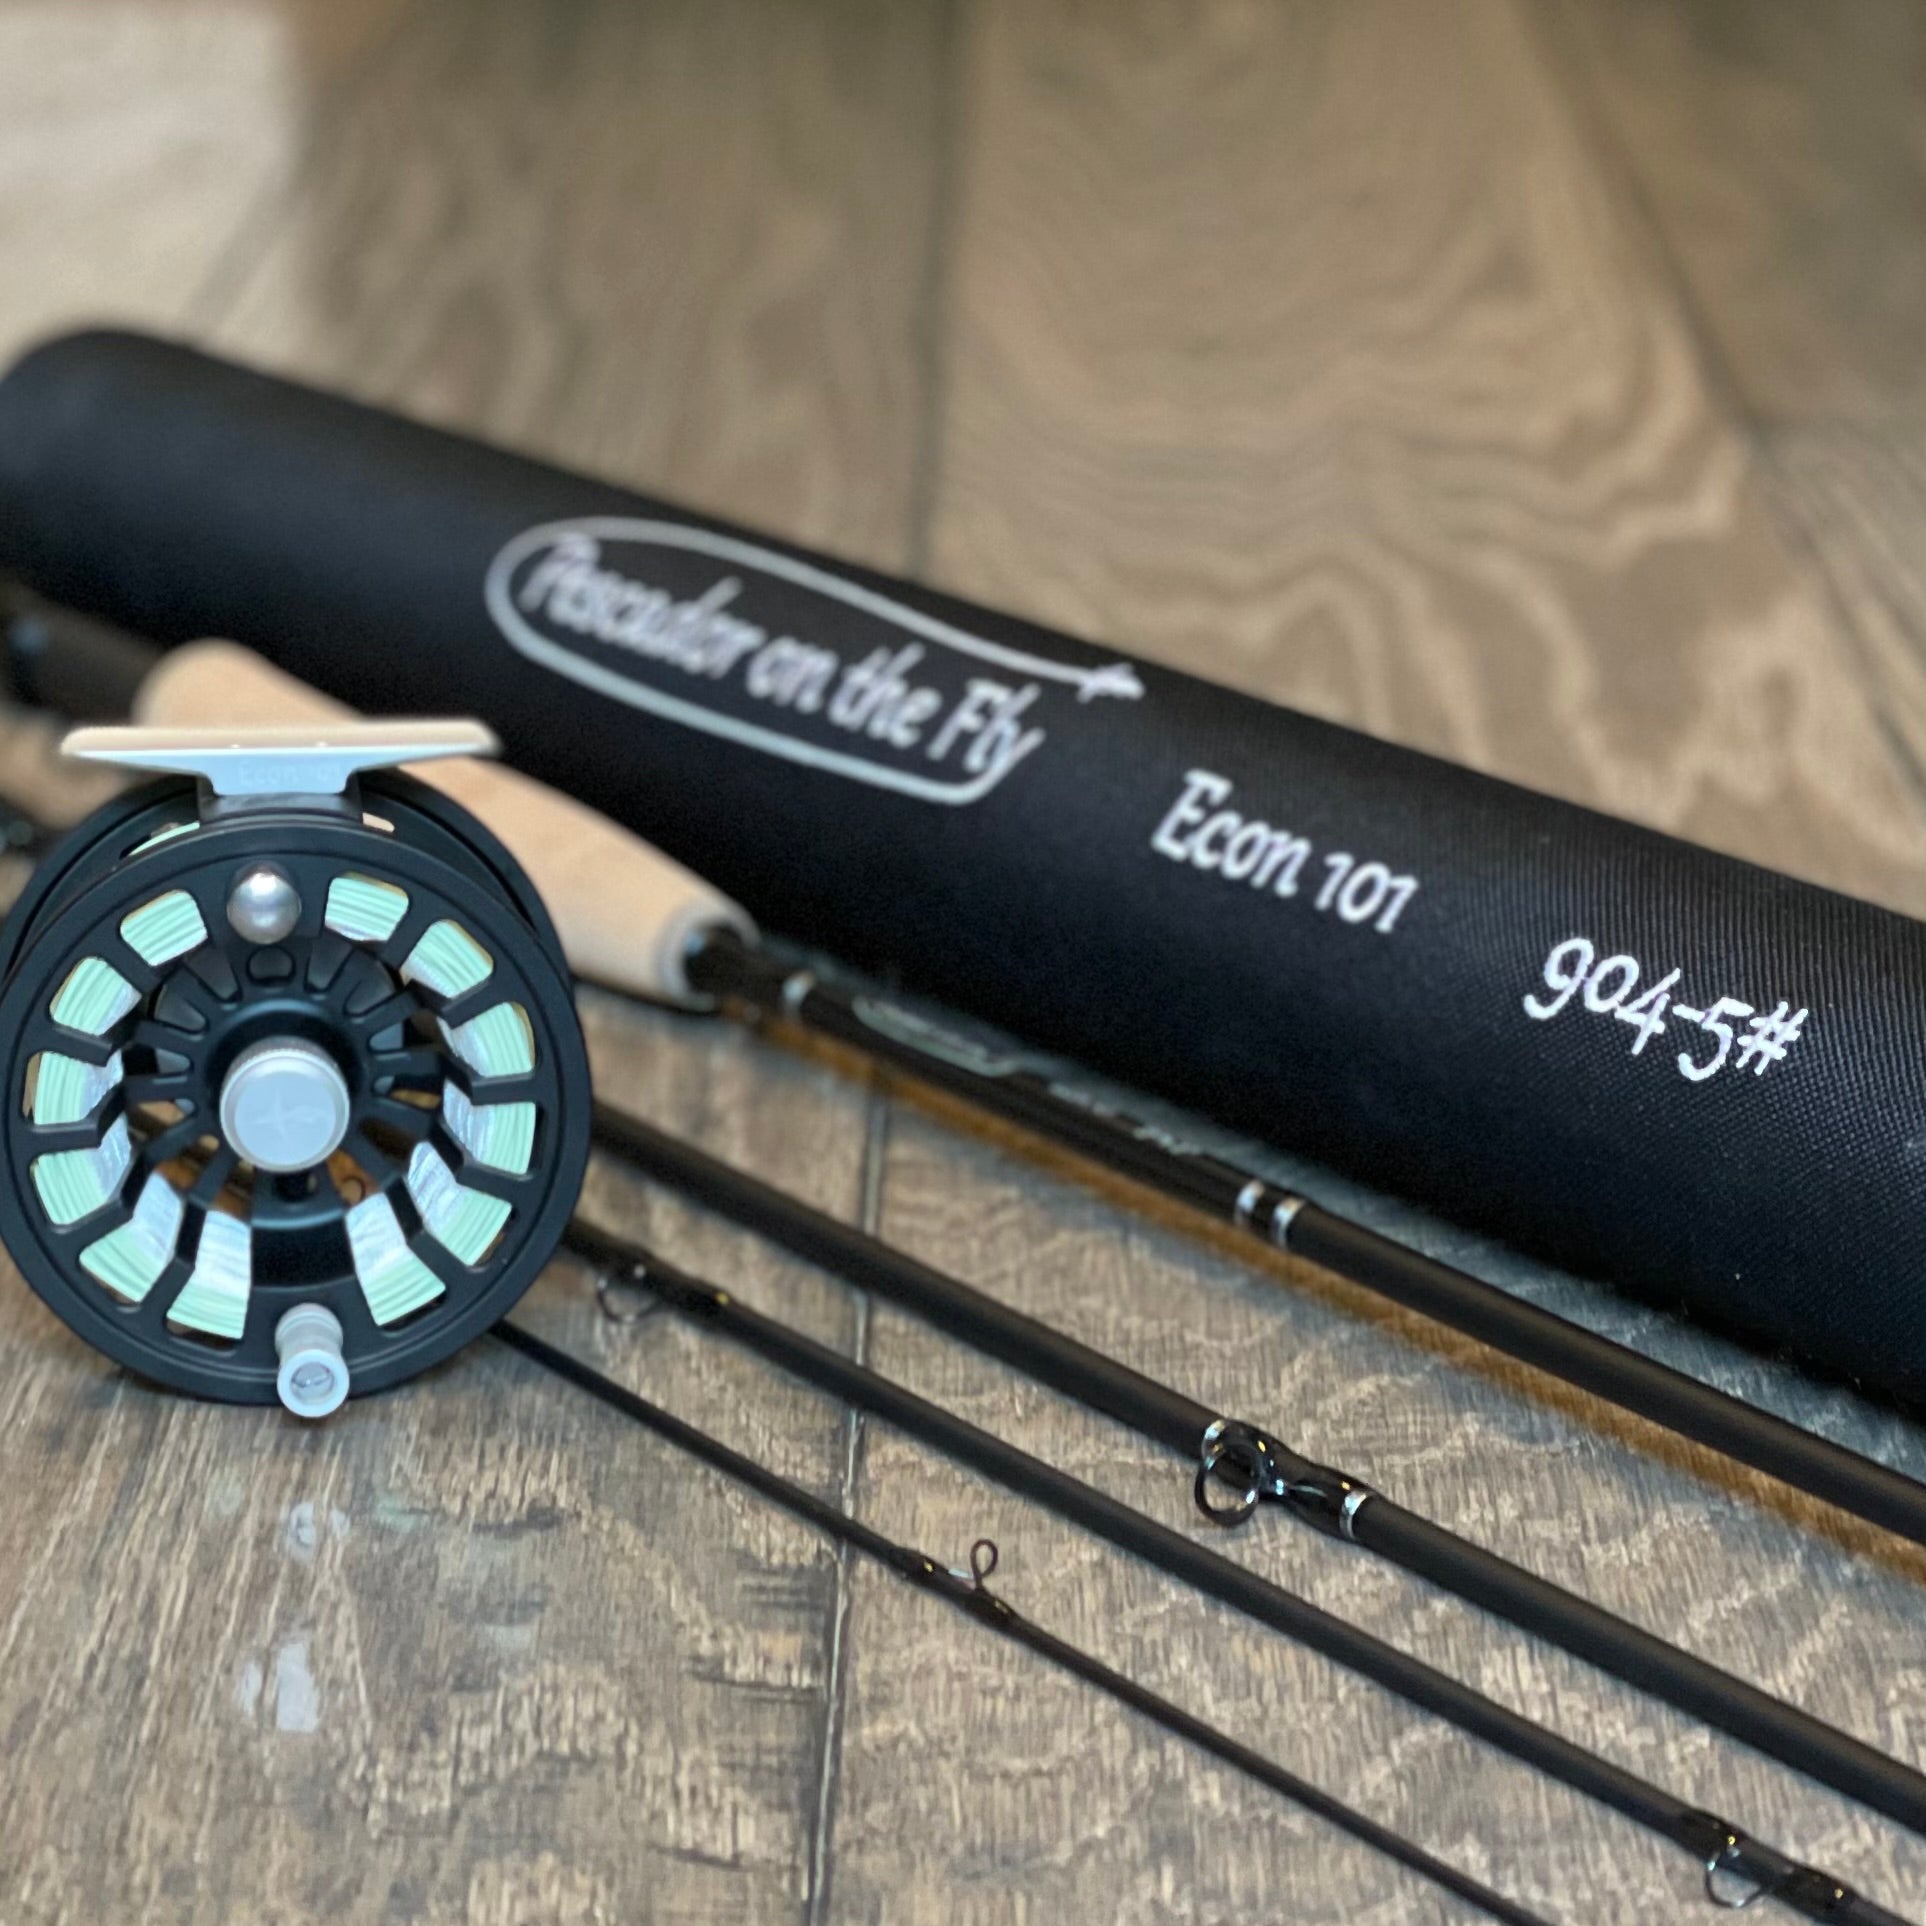 ECON 101 Fly Fishing Starter Combo Package | 904-5 | 9' Four Section 5 Weight Fly Rod And Reel Beginner Outfit